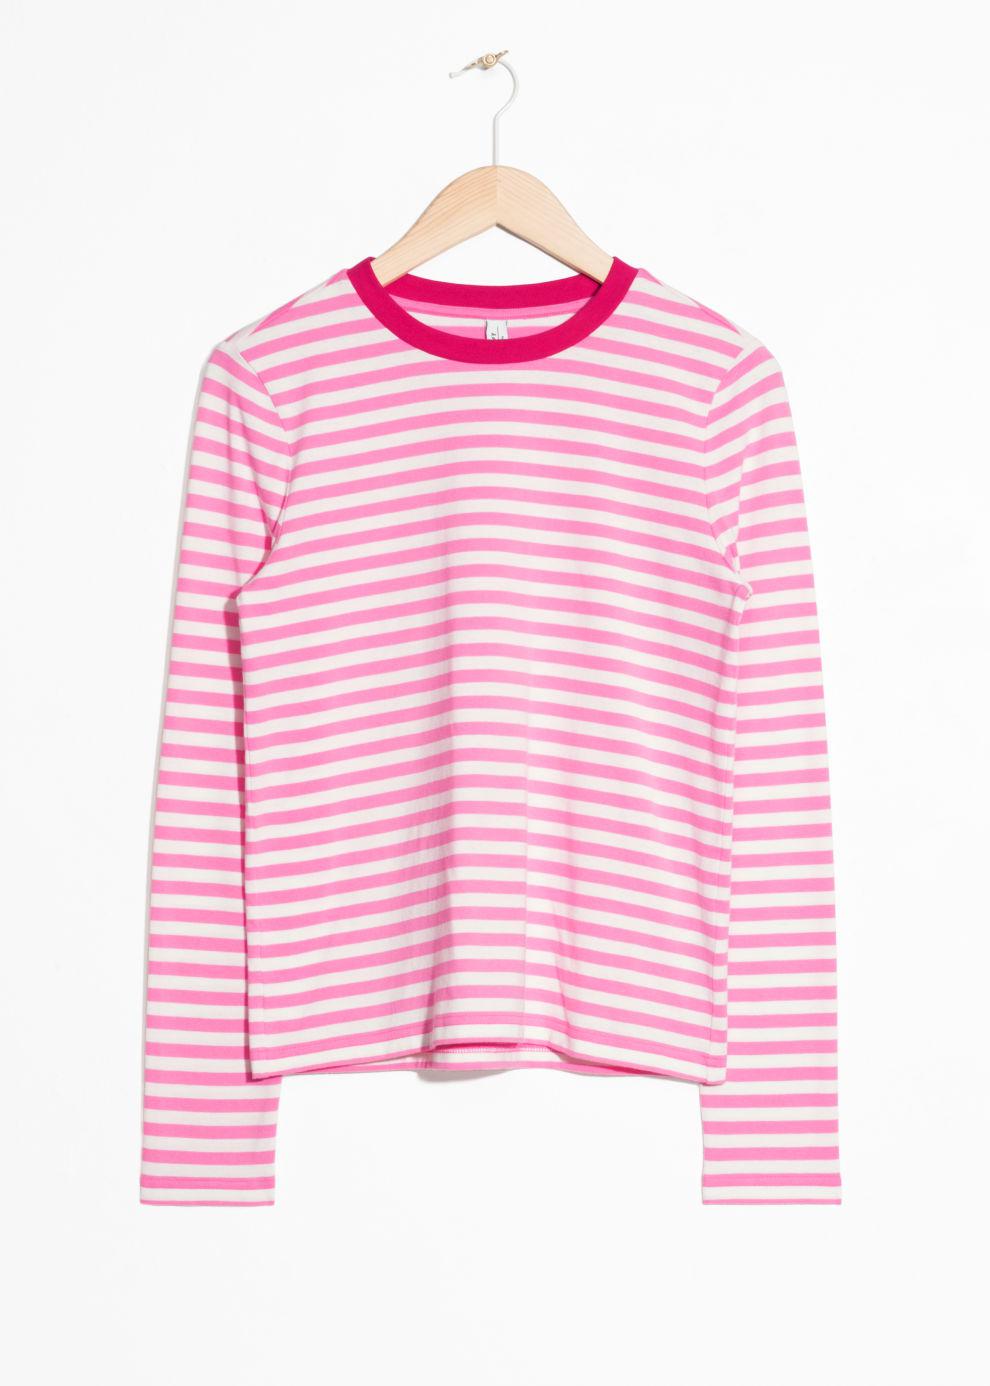 & Other Stories Cotton Striped Long Sleeve T-shirt in Pink - Lyst